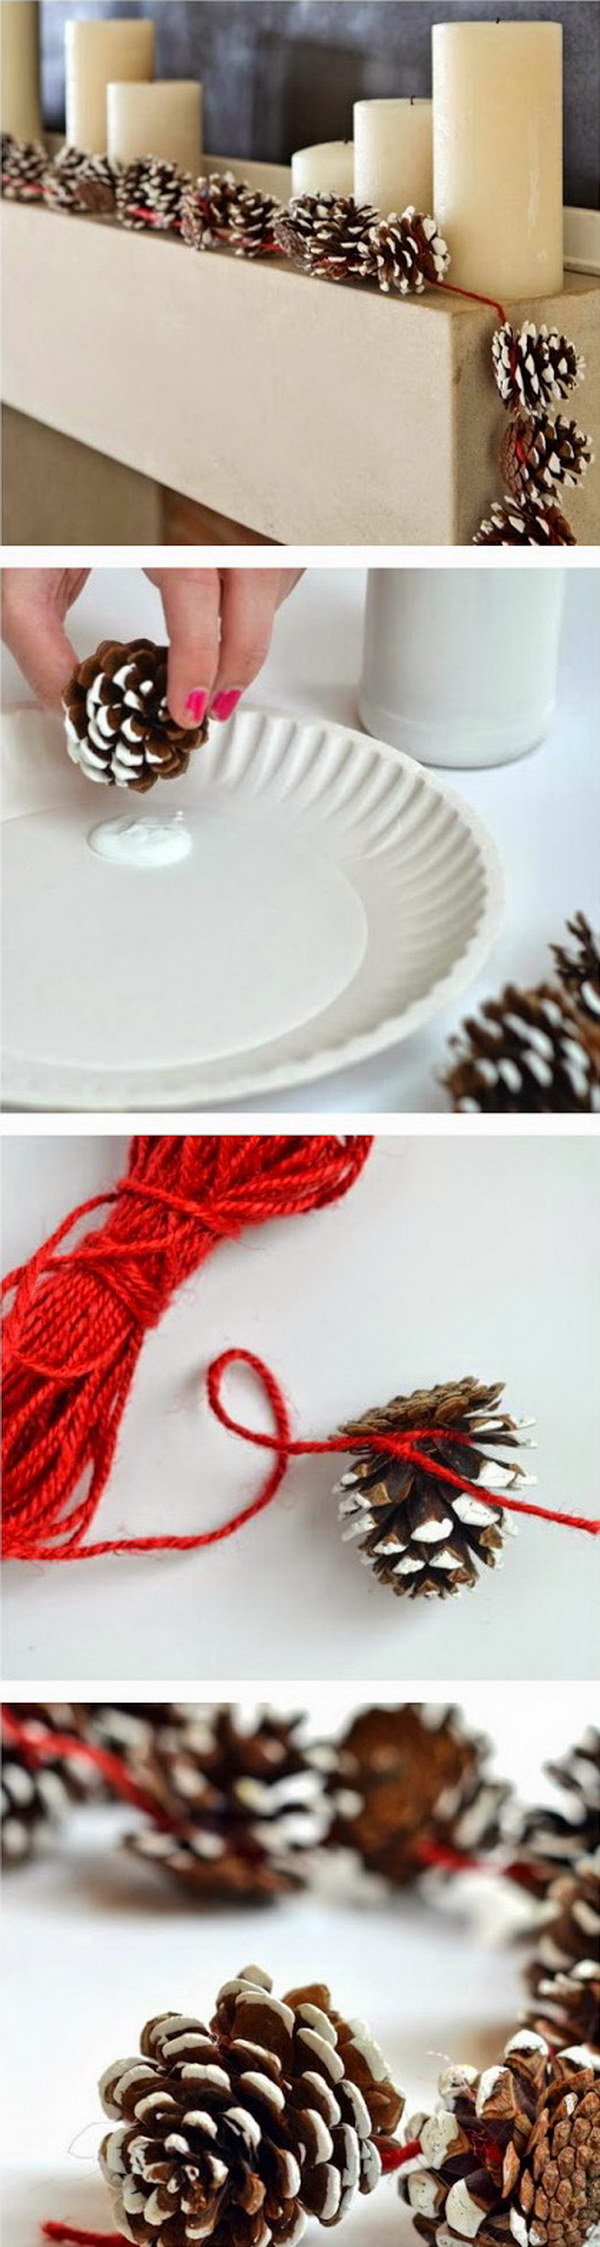 Pine Cone Garlands for Christmas Decoration. Love its rustic look for decoration at home. Super easy crafts that can get your kids involved in.